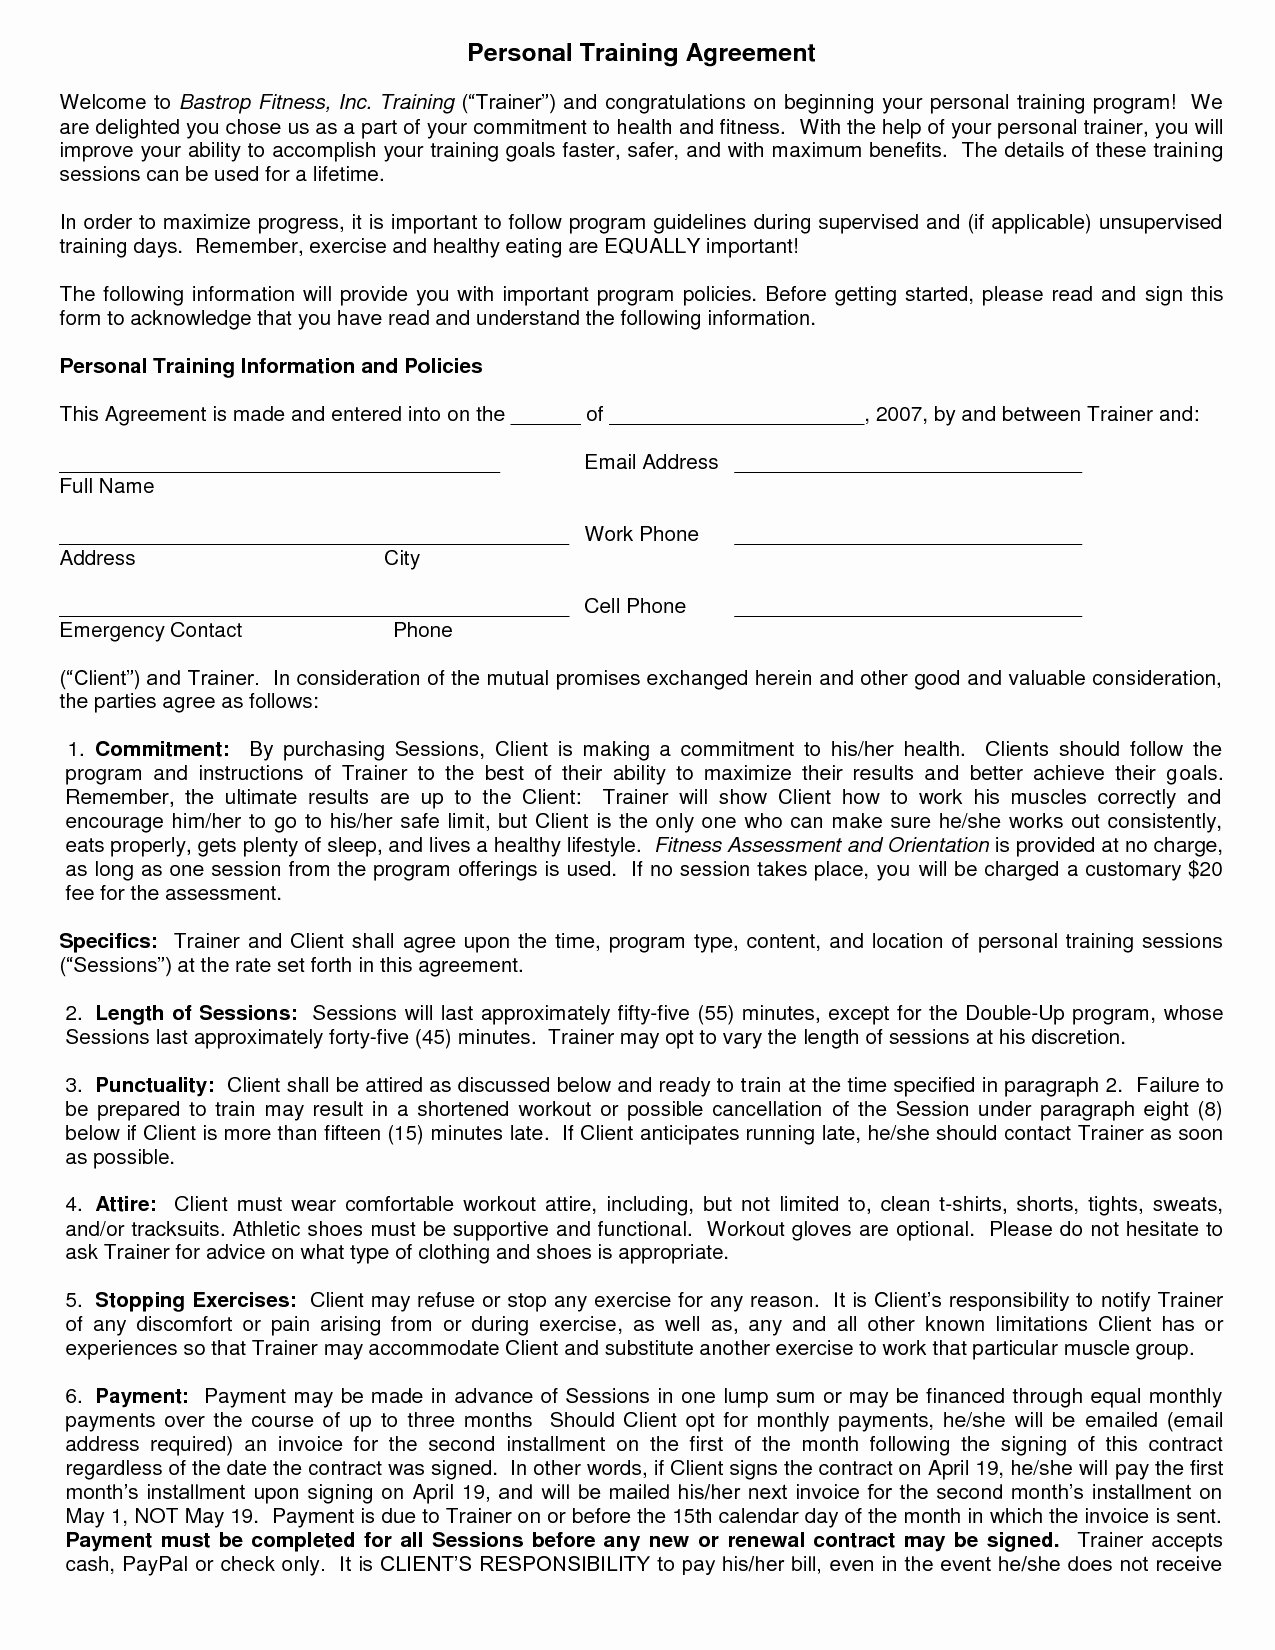 Personal Training Contracts Template Best Of Personal Training Service Agreement Excellent 27